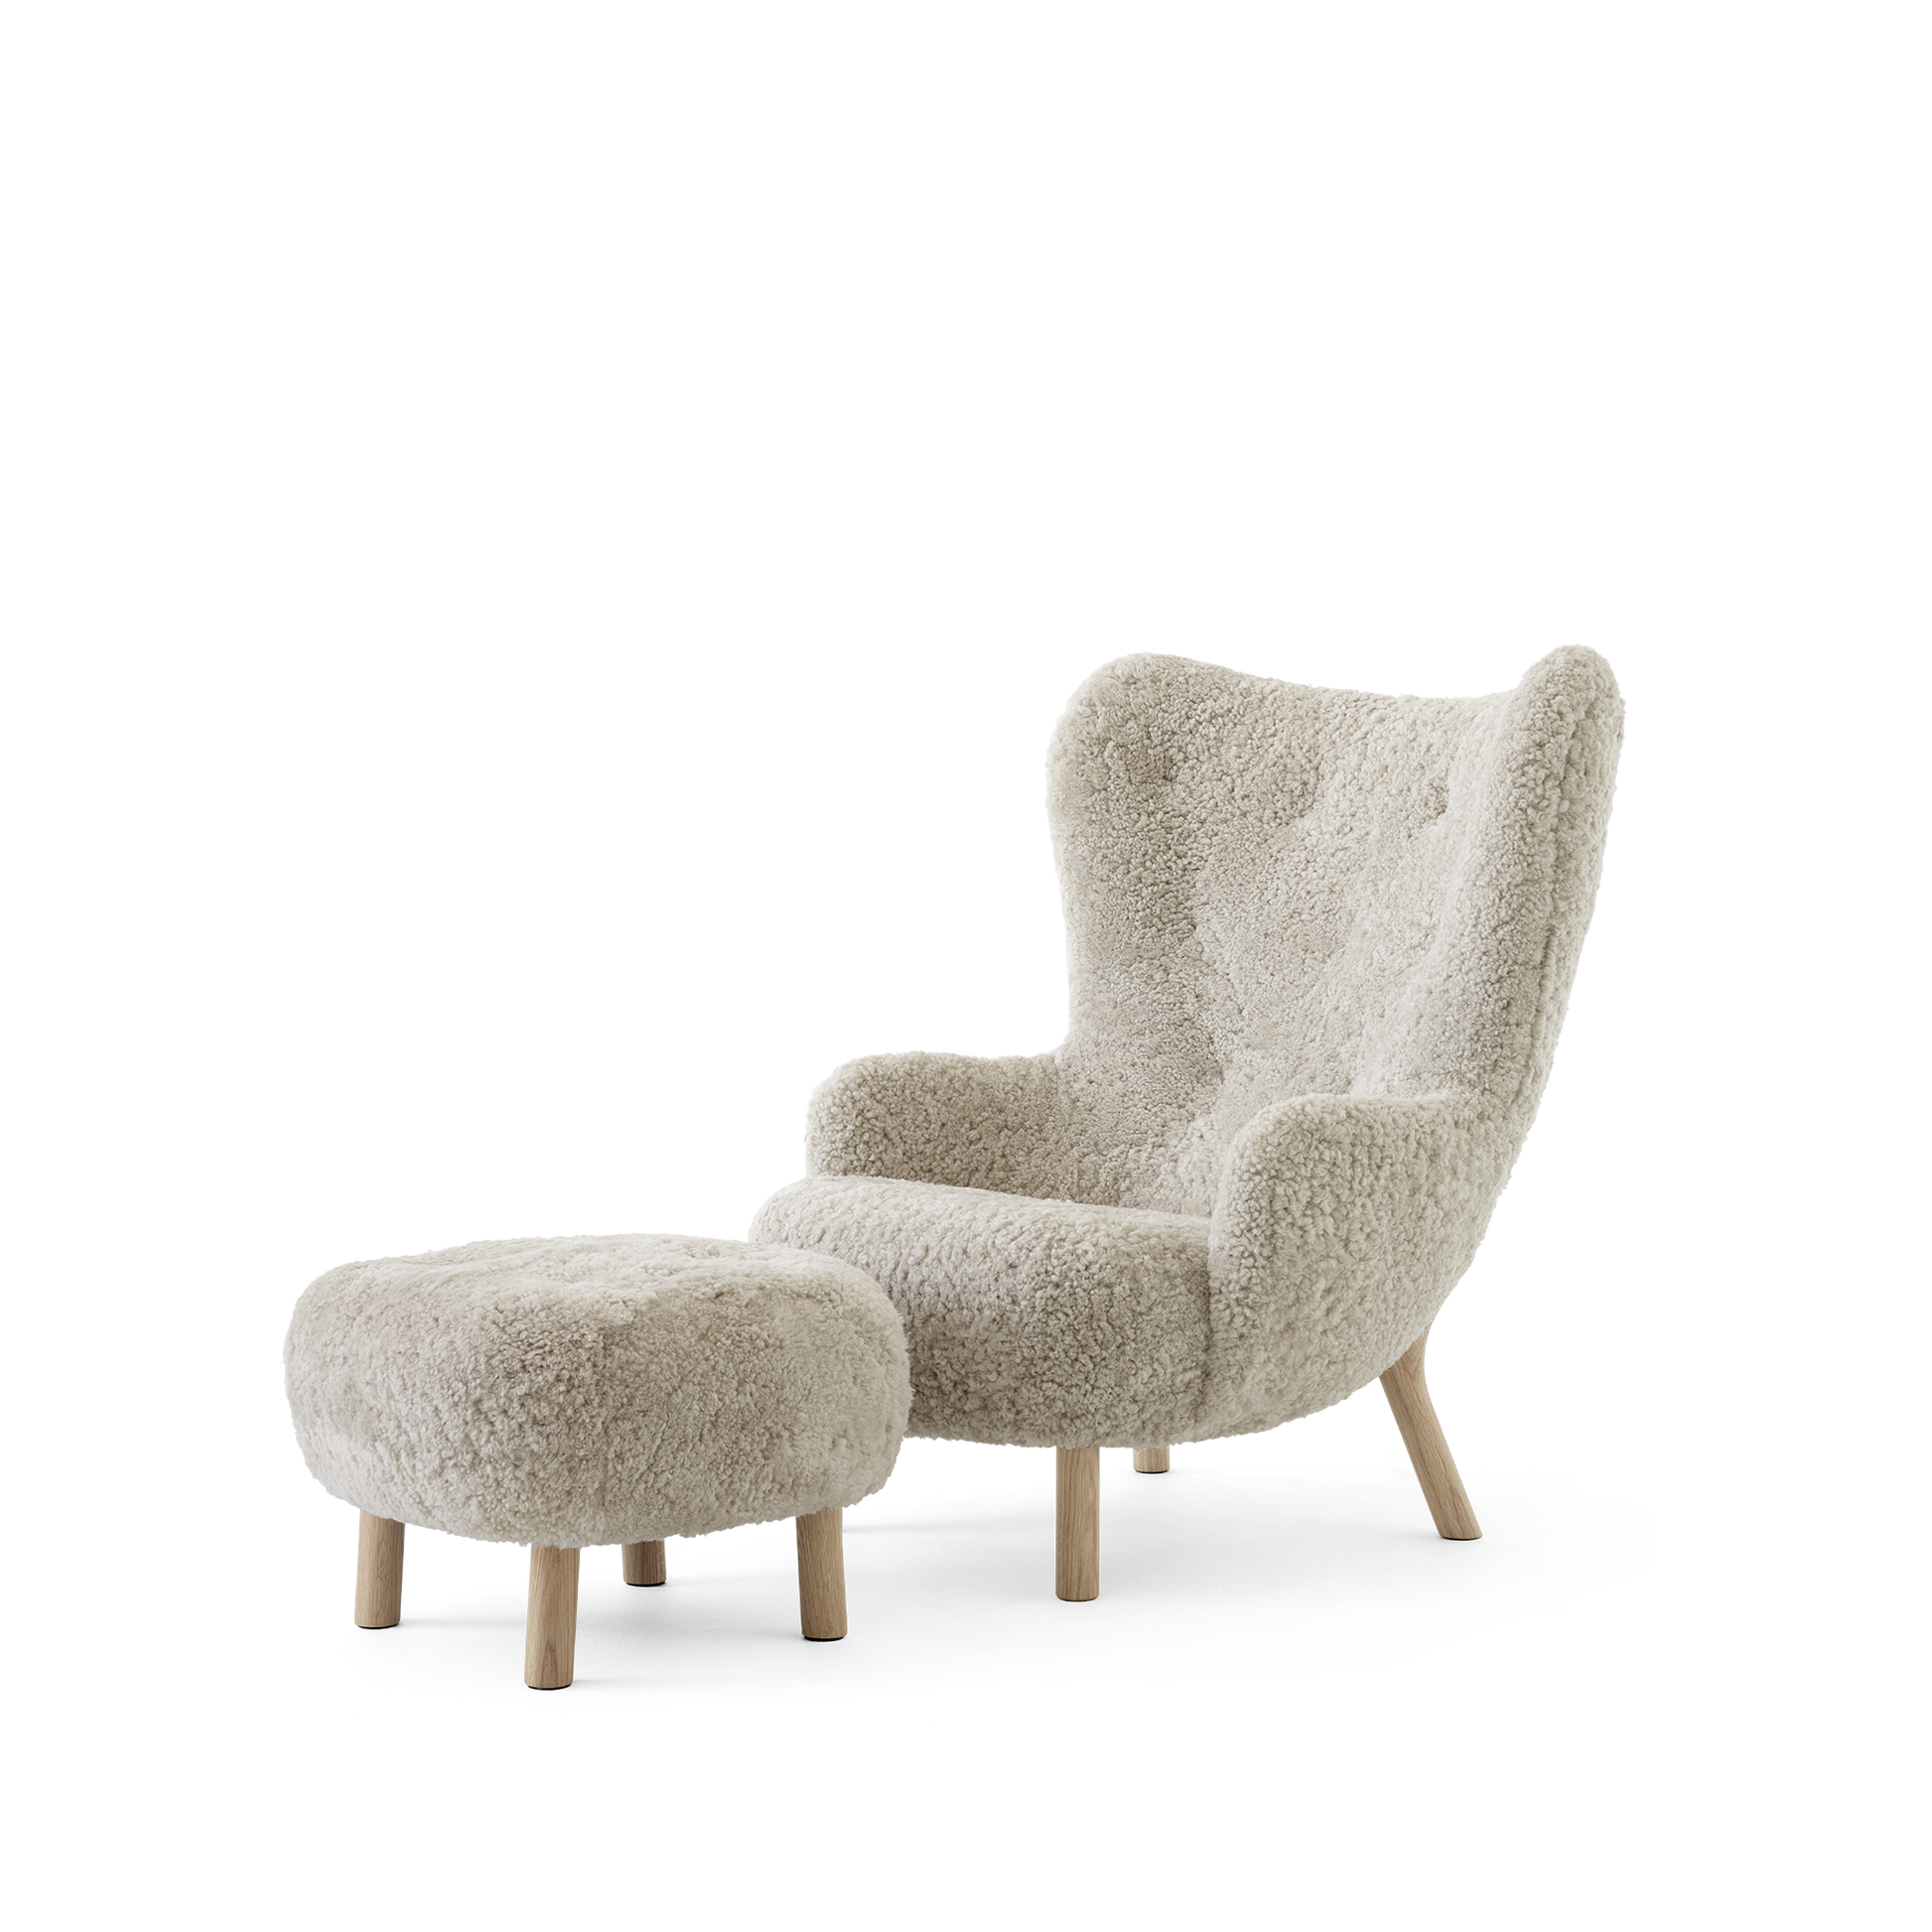 Petra VB3 Armchair by &tradition #Sheepskin Moonlight/Oiled Oak Incl. ATD1 Puff